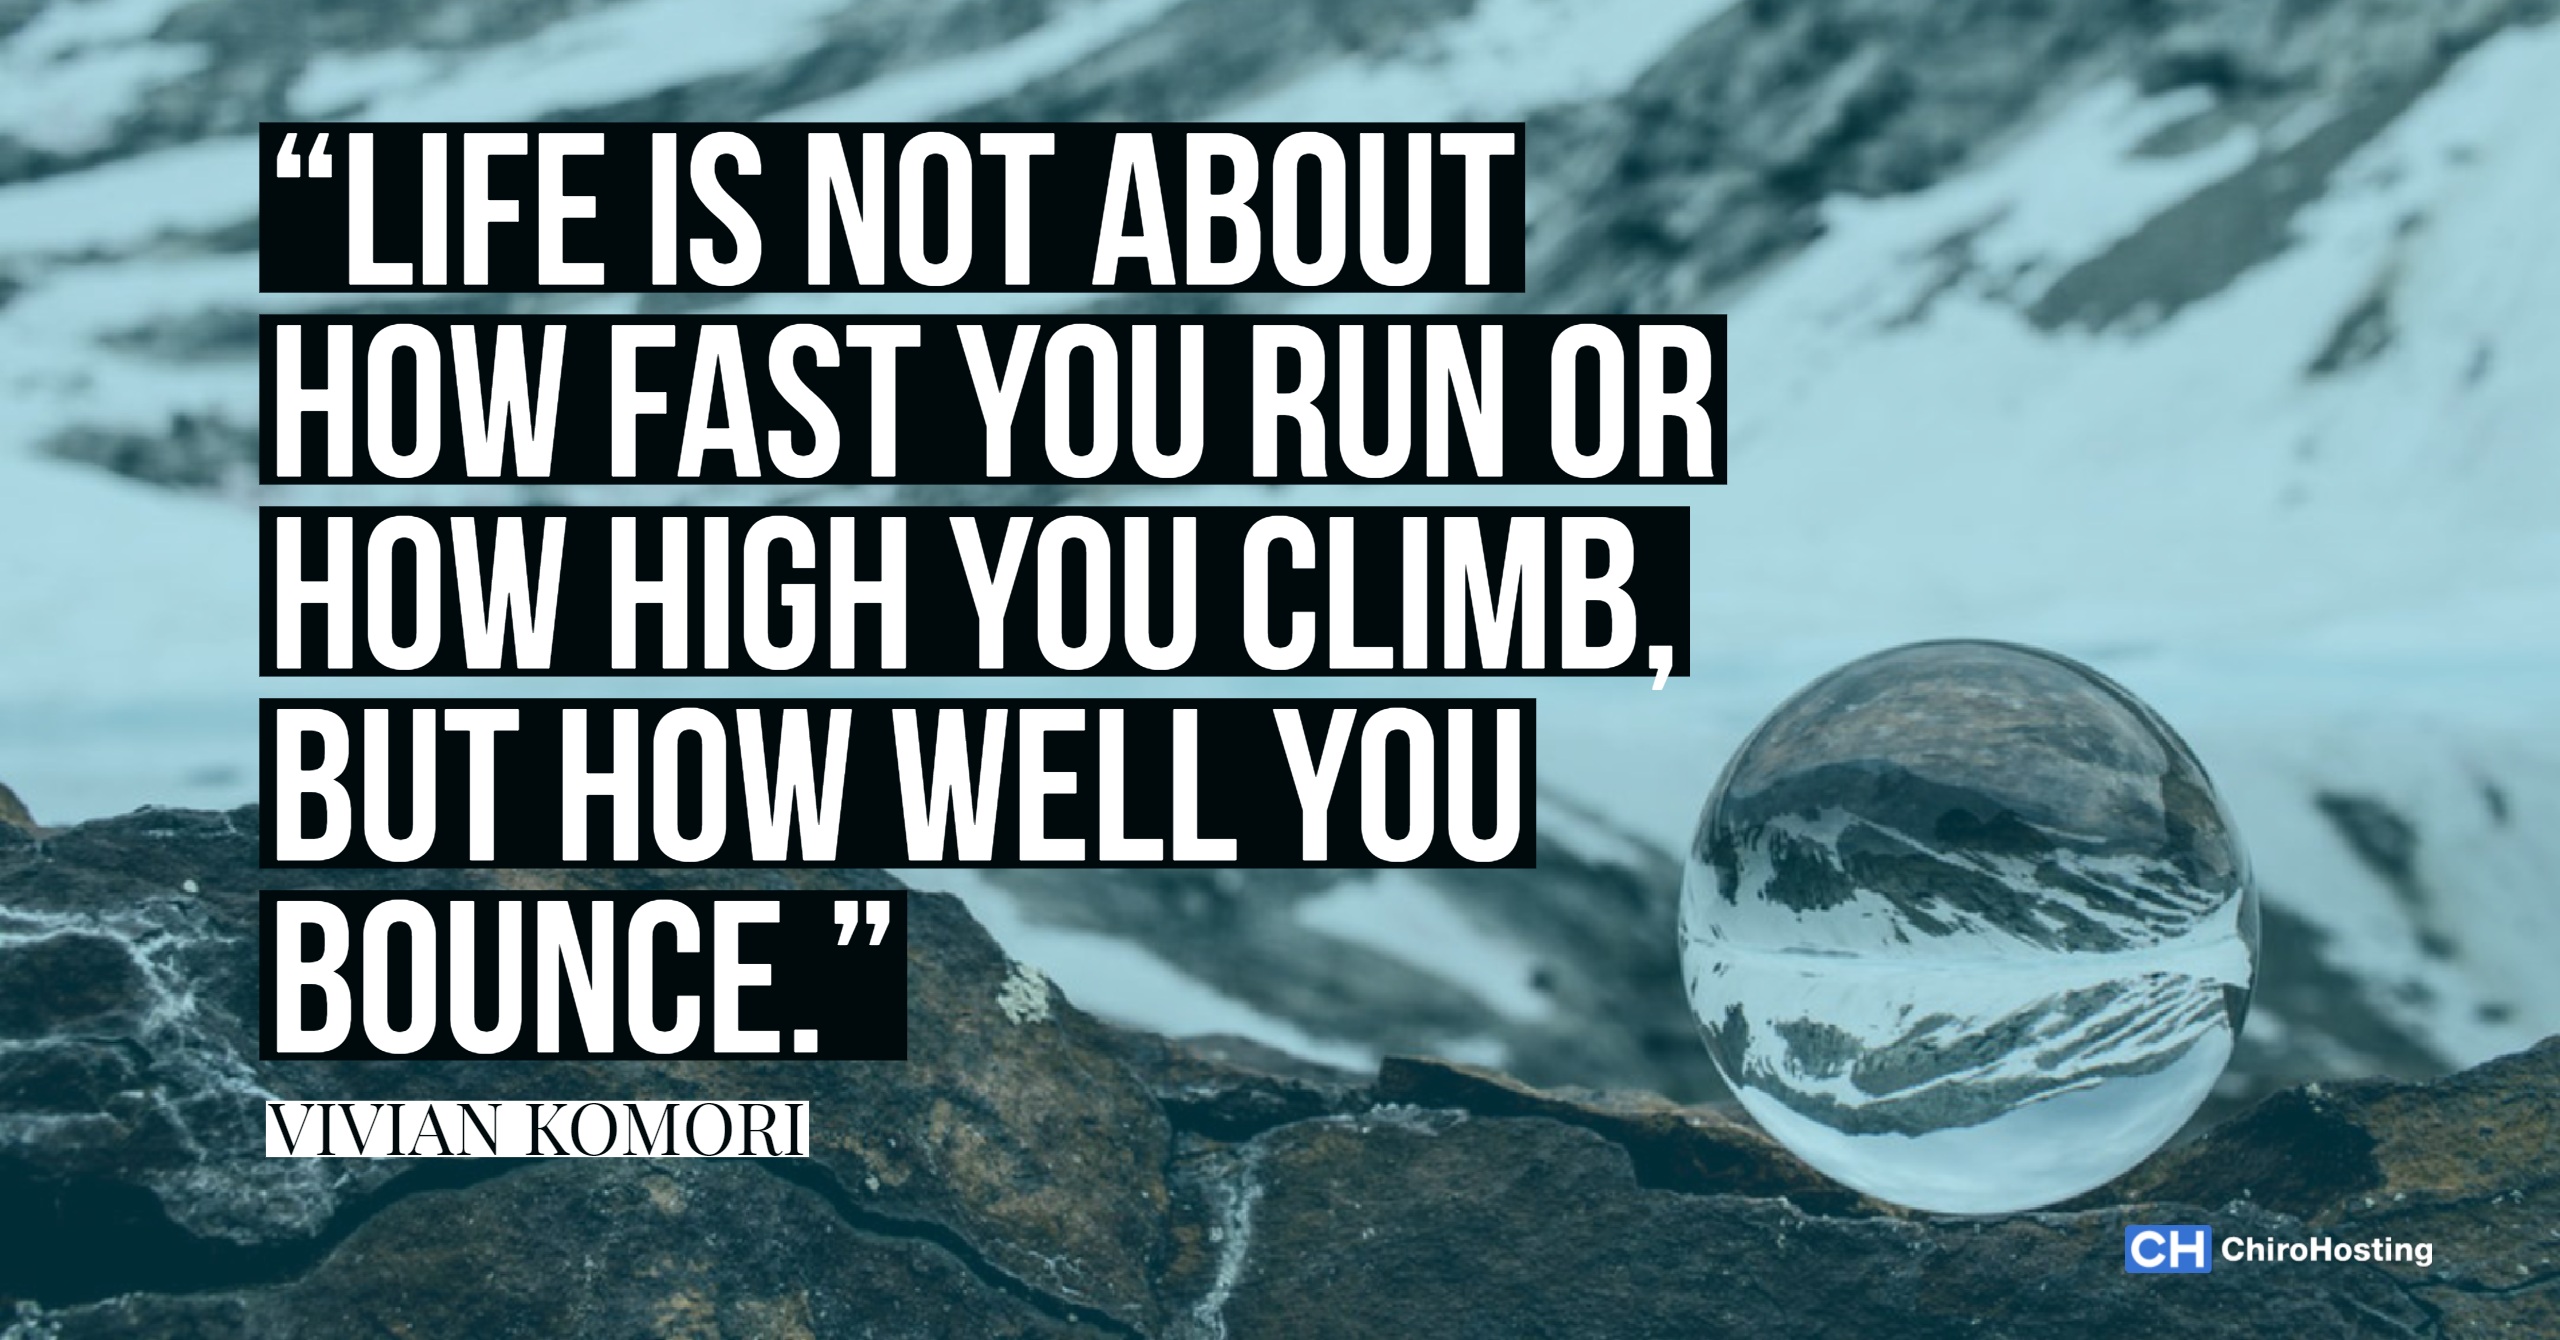 Life Is Not about How Fast You Run or How High You Climb, but How Well You Bounce - Vivian Komori